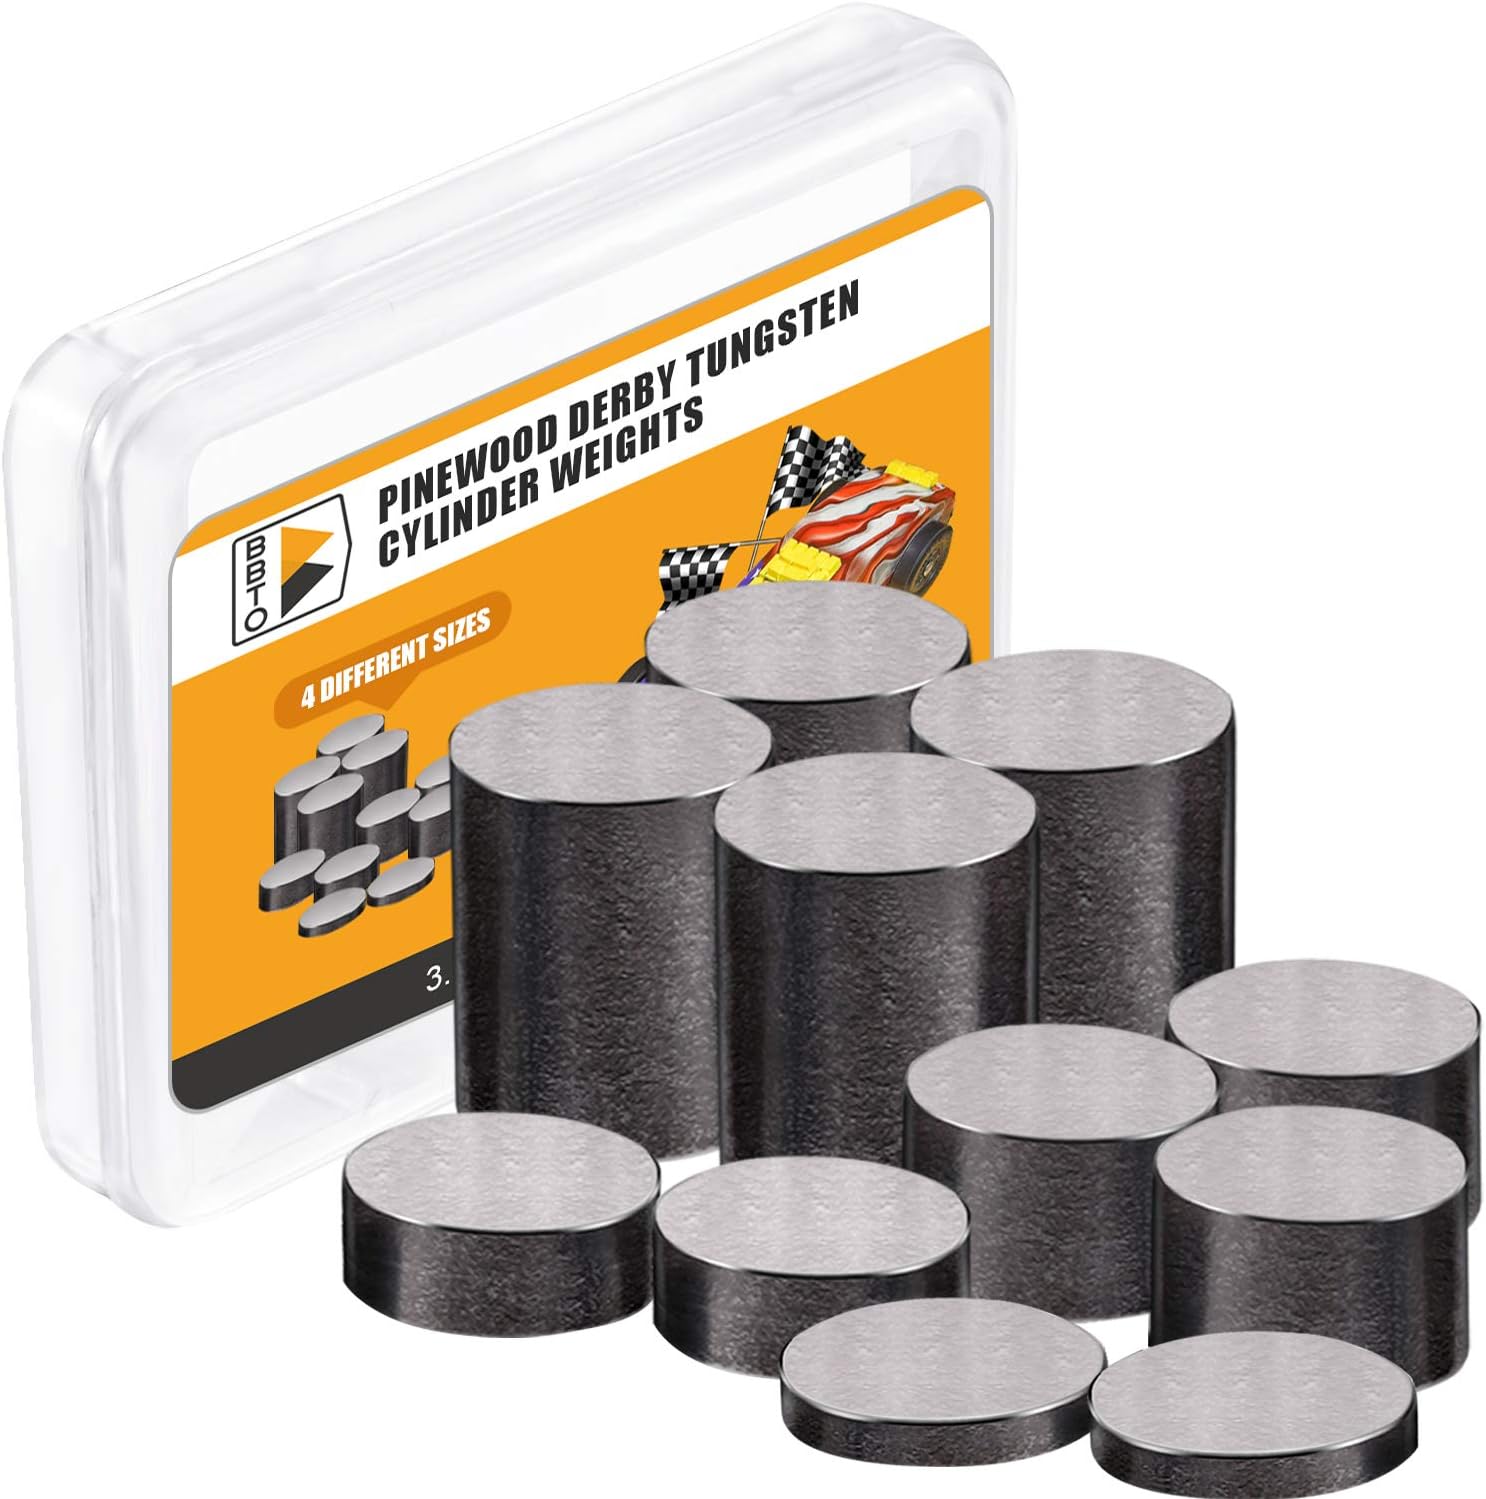 Tungsten Weights 3.125 Ounce 3/8 Inch Incremental Cylinders Car Incremental Weights Compatible with Pinewood Car Derby Weights (11 Pieces, 4 Size)